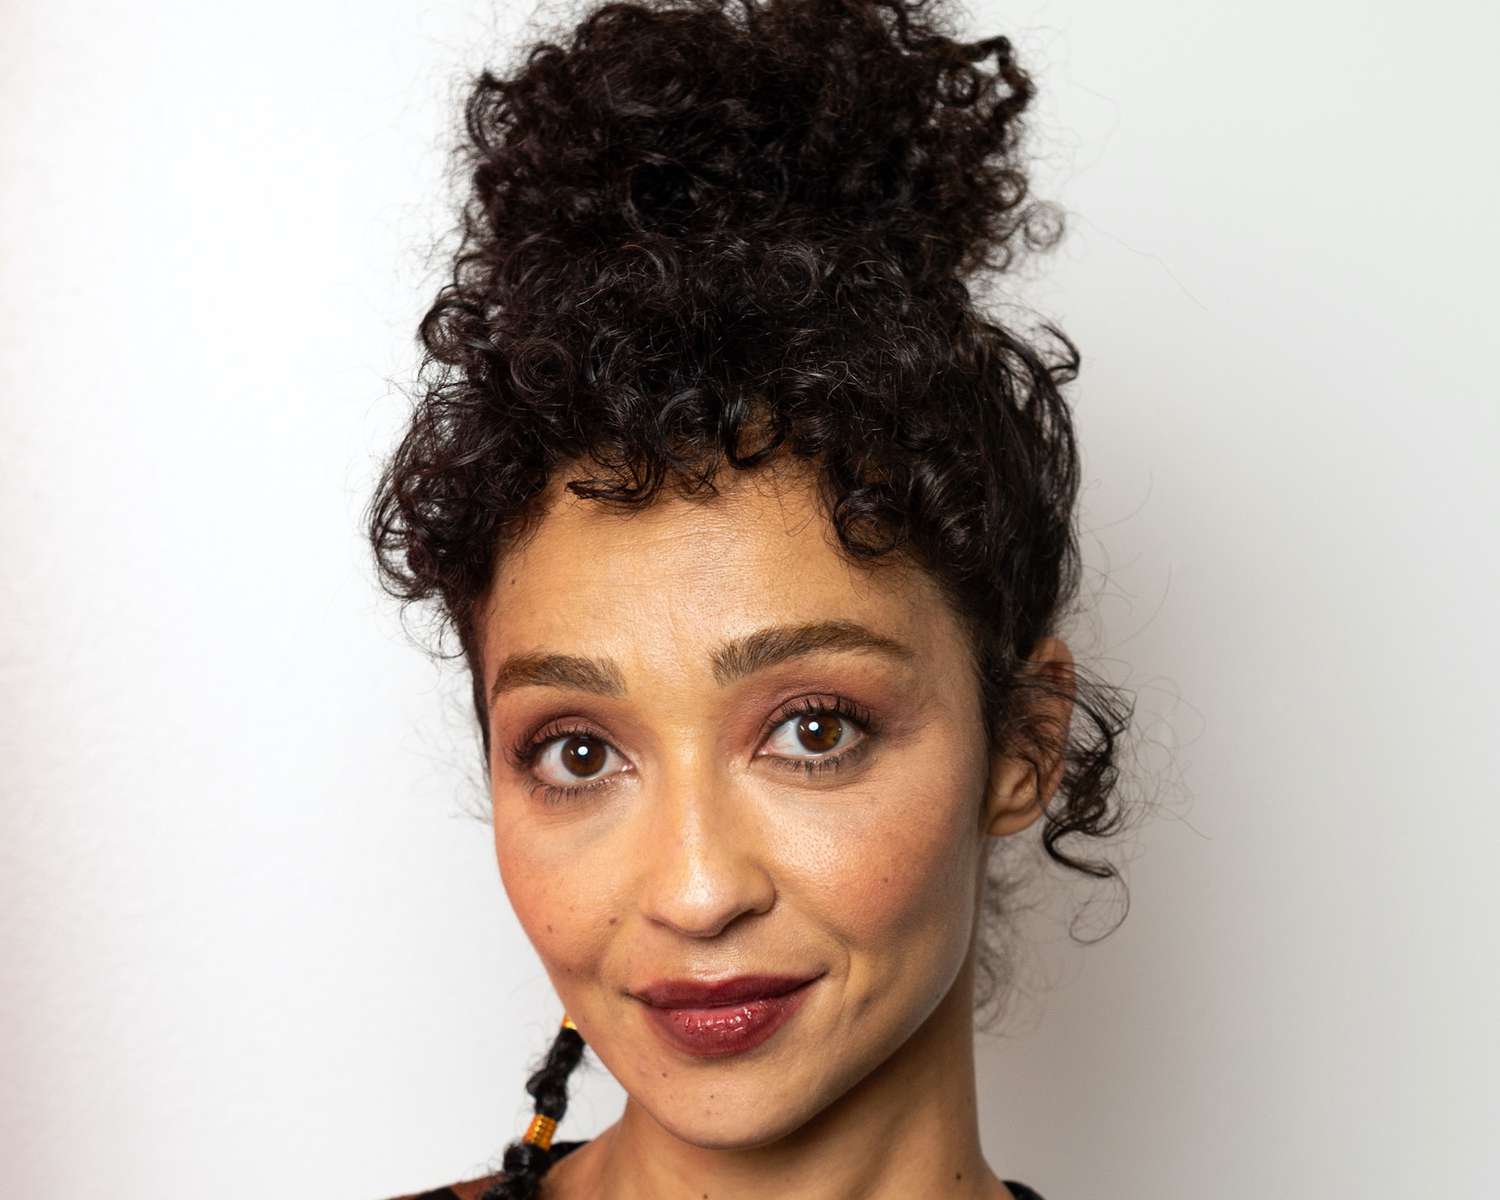 Ruth Negga wears a curly updo with baby bangs